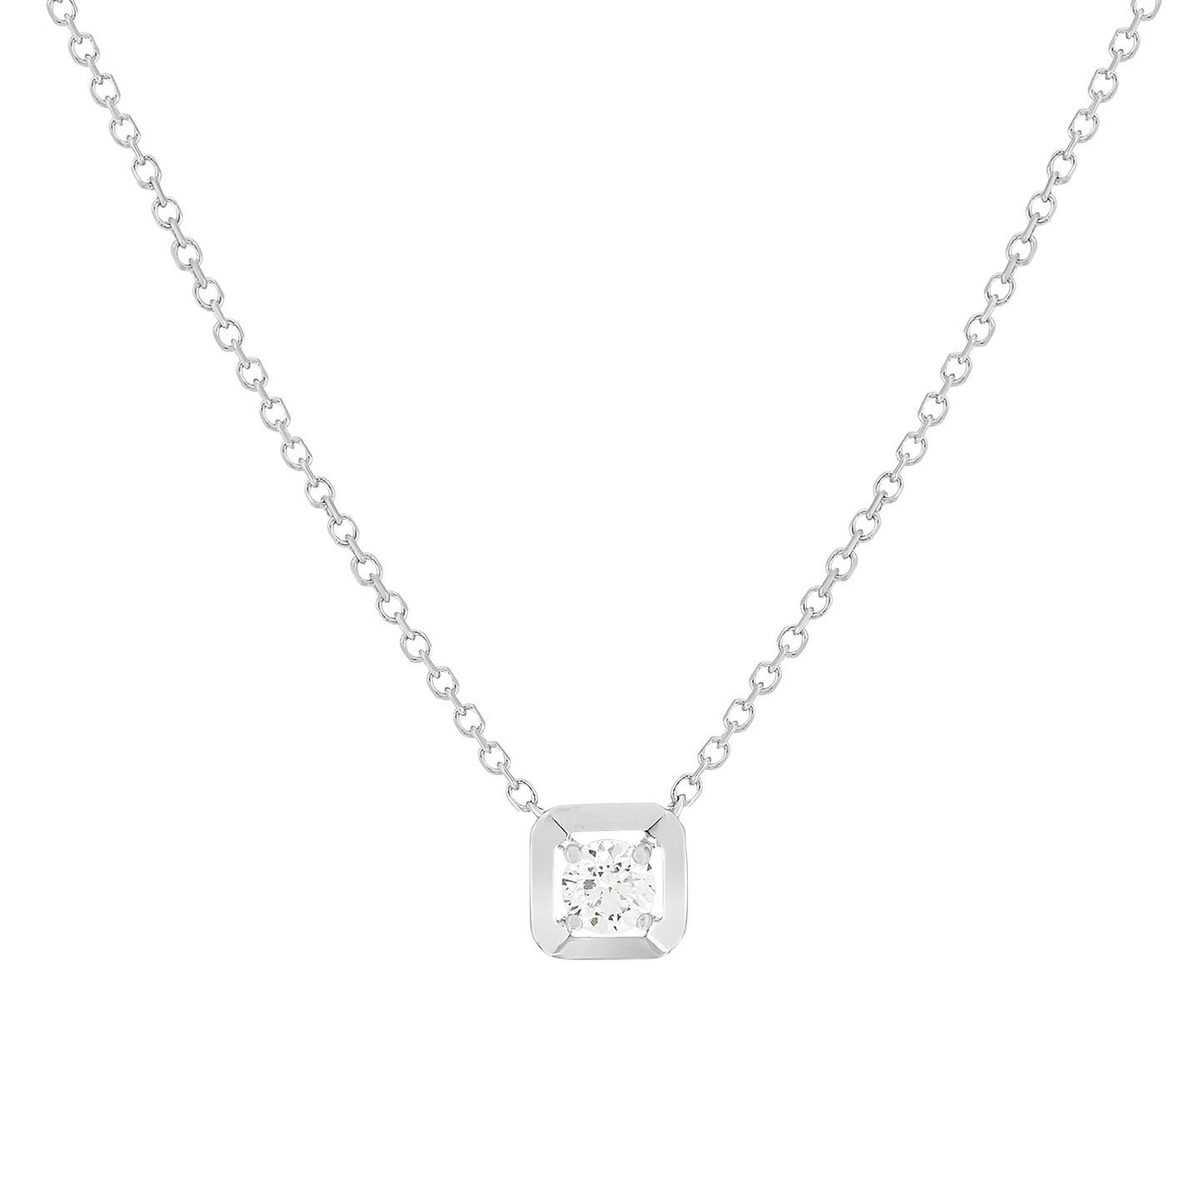 Collier or blanc 750, diamant synthétique 0.18 carat